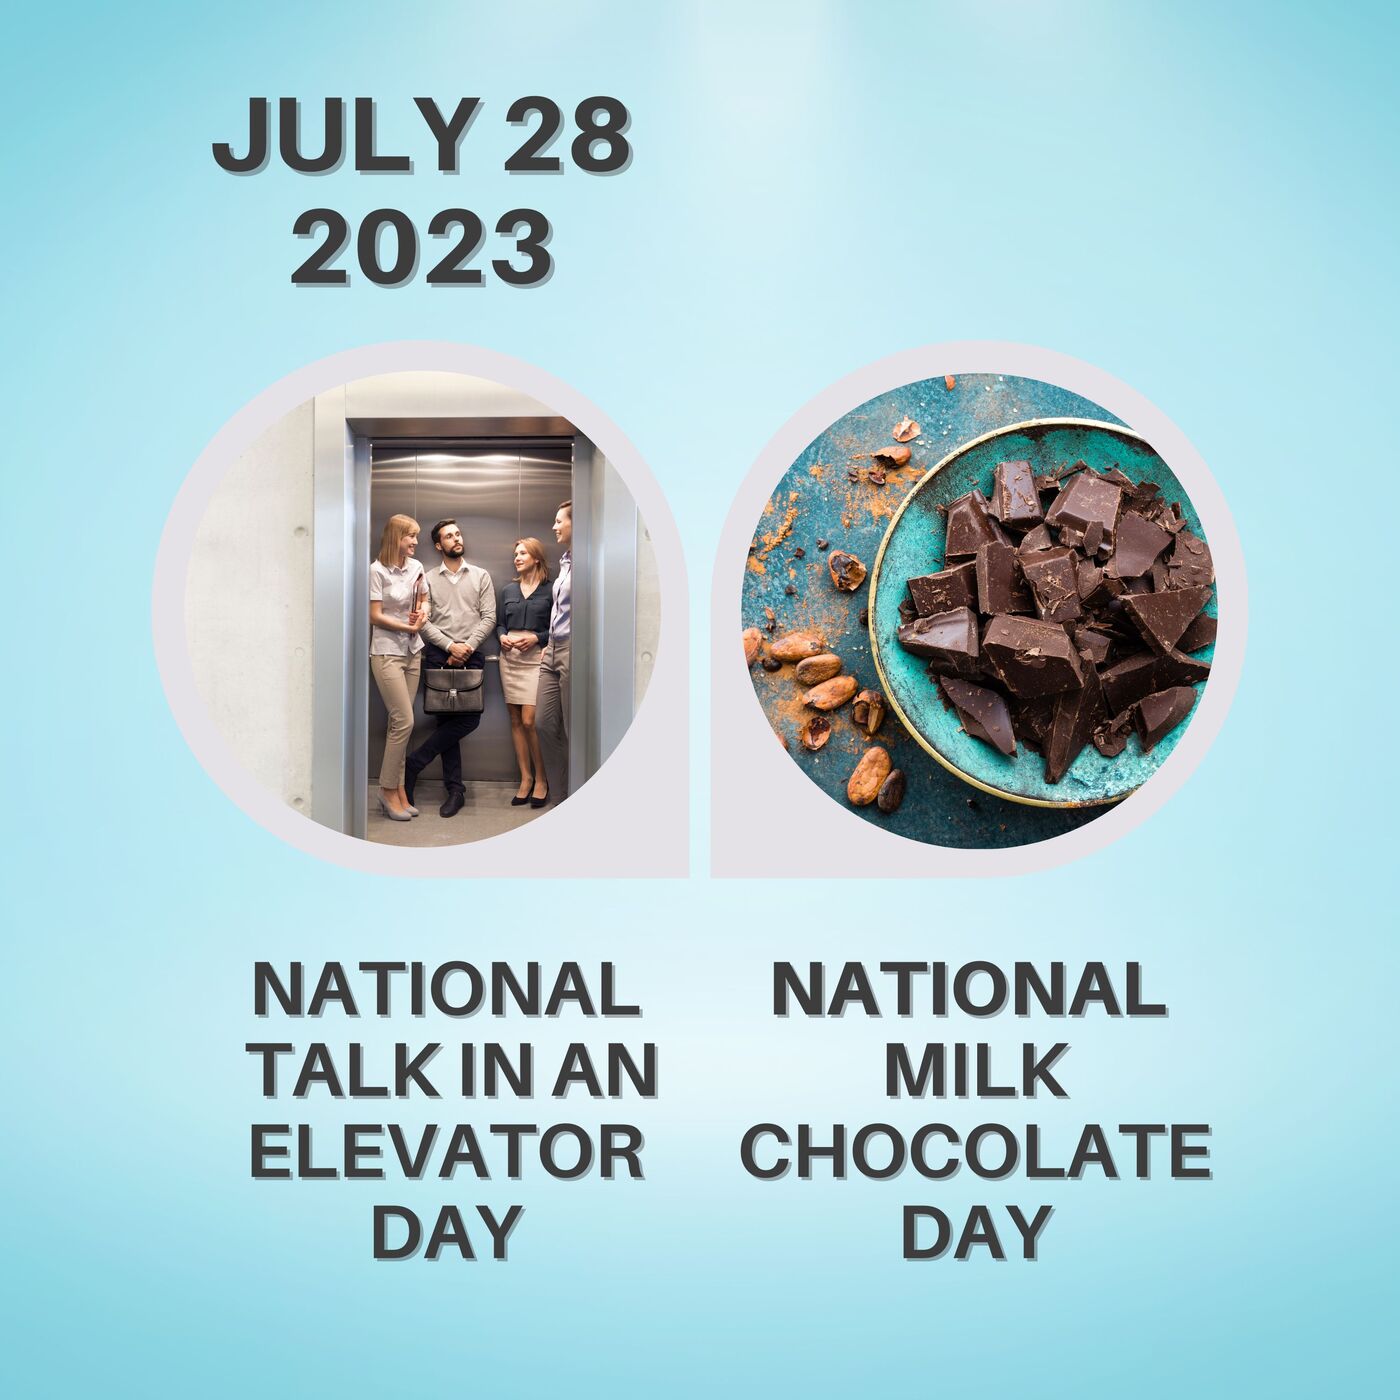 July 28, 2023 | Elevator Chats and Chocolate Treats: National Talk in an Elevator Day & National Milk Chocolate Day